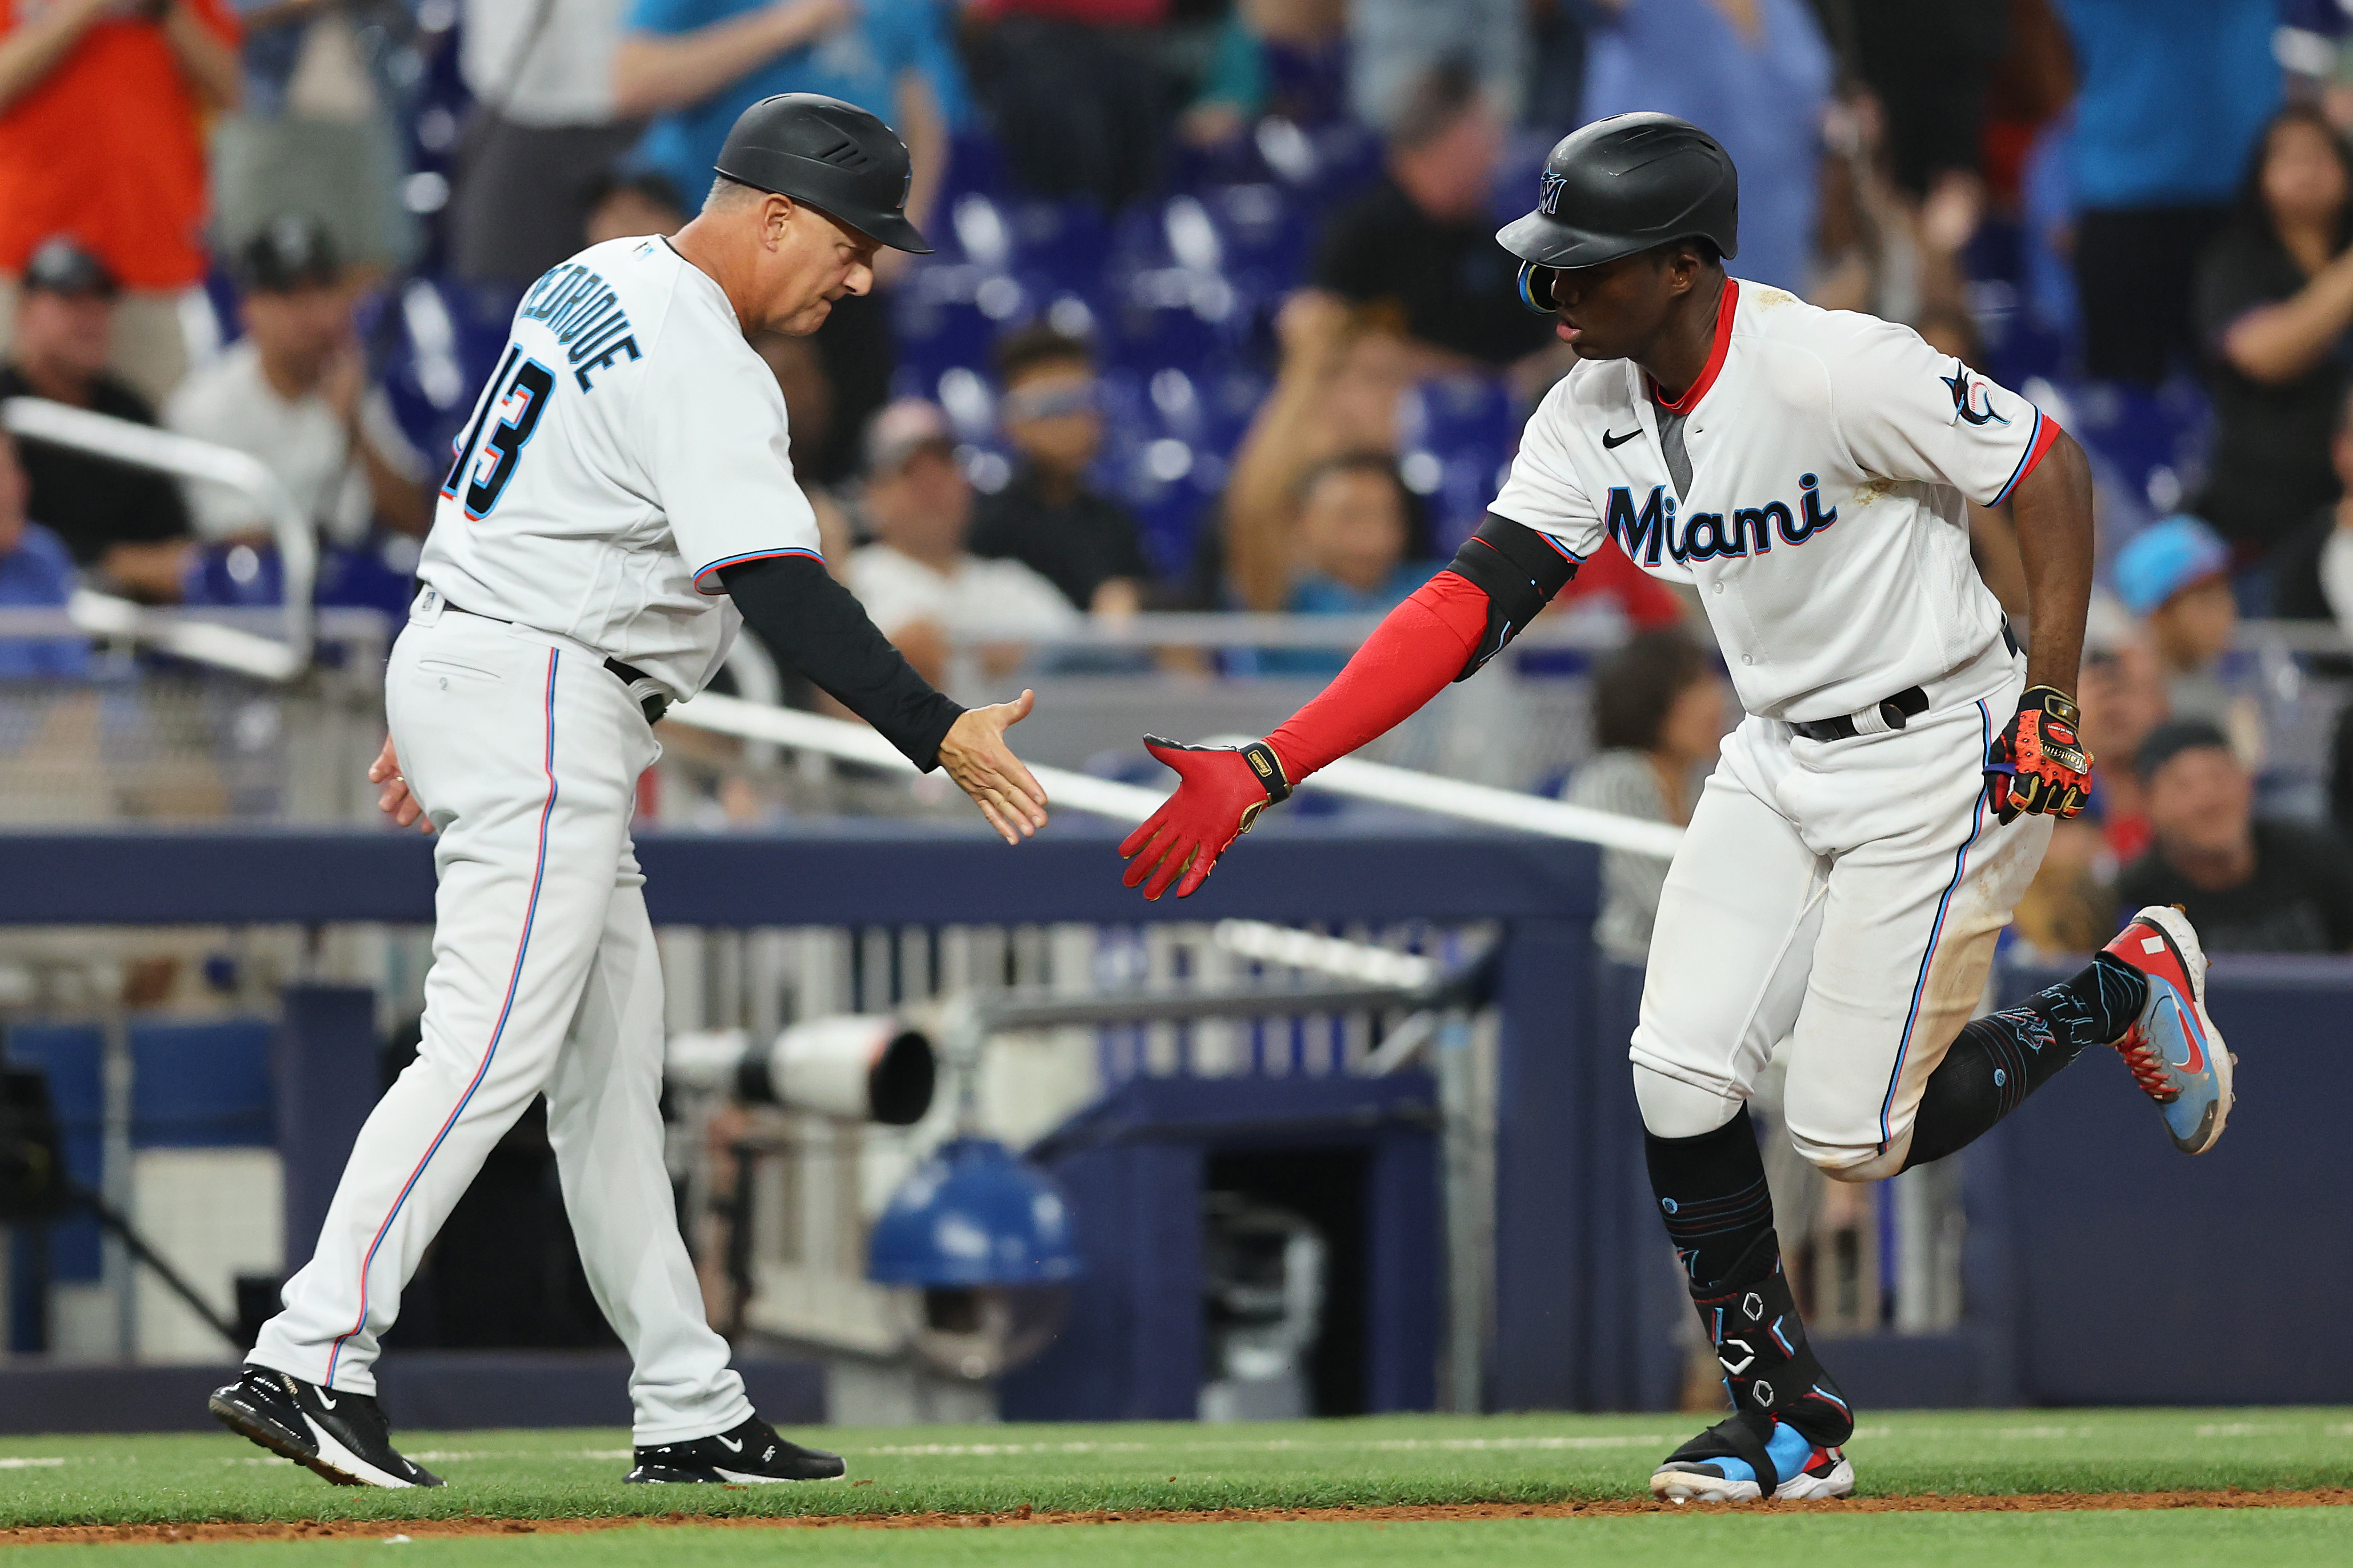 Jesus Sanchez #7 of the Miami Marlins high fives third base coach Al Pedrique #13 after hitting a two-run home run against the Washington Nationals during the fifth inning at loanDepot park on June 09, 2022 in Miami, Florida.